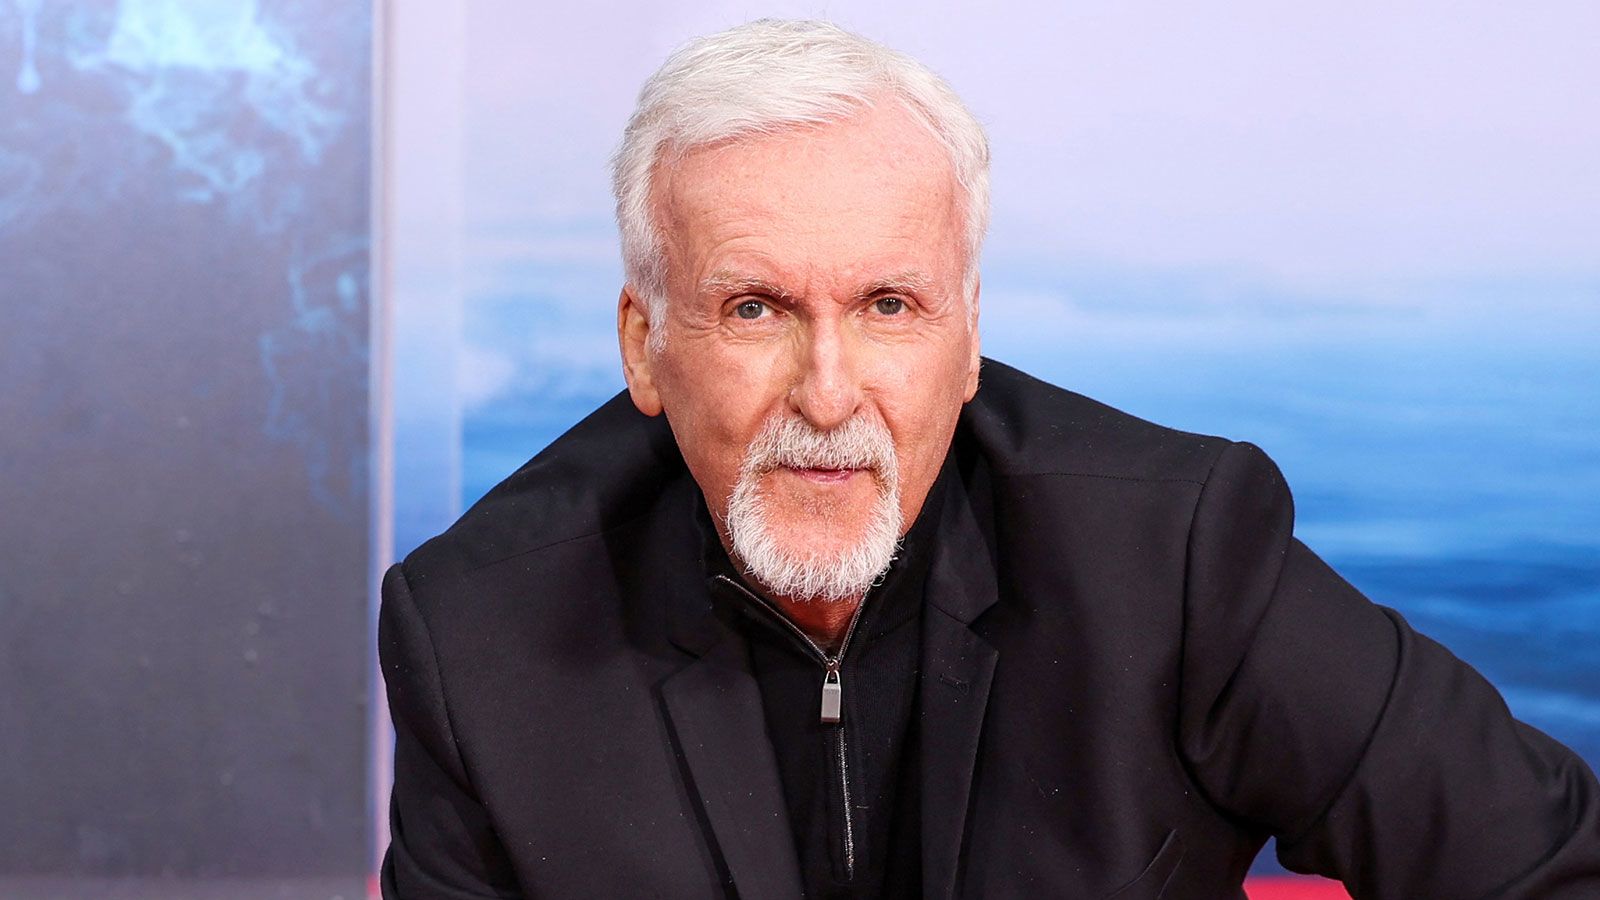 James Cameron offers thoughts on Titanic-bound submersible tragedy...